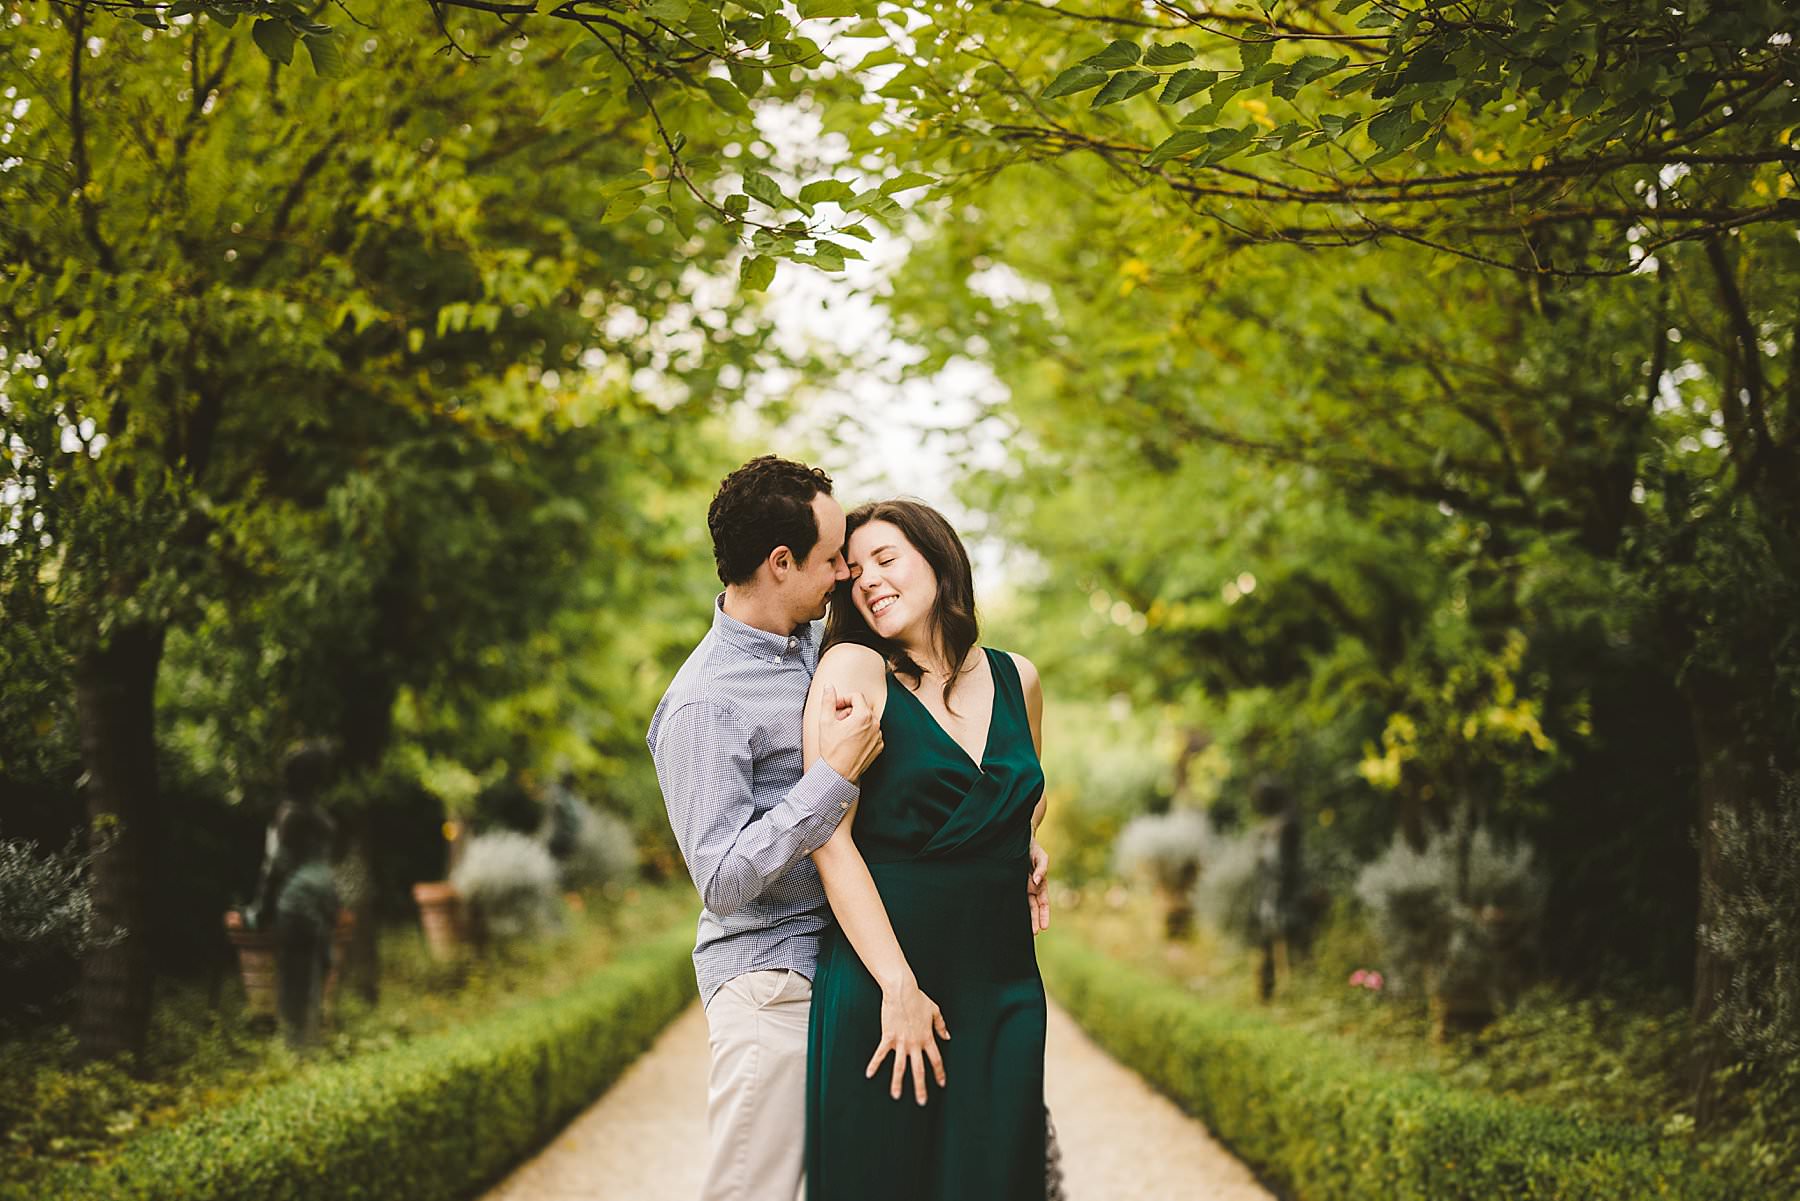 Celebrate your love with romantic engagement photos in the heart of Tuscany at luxury resort of Borgo Santo Pietro